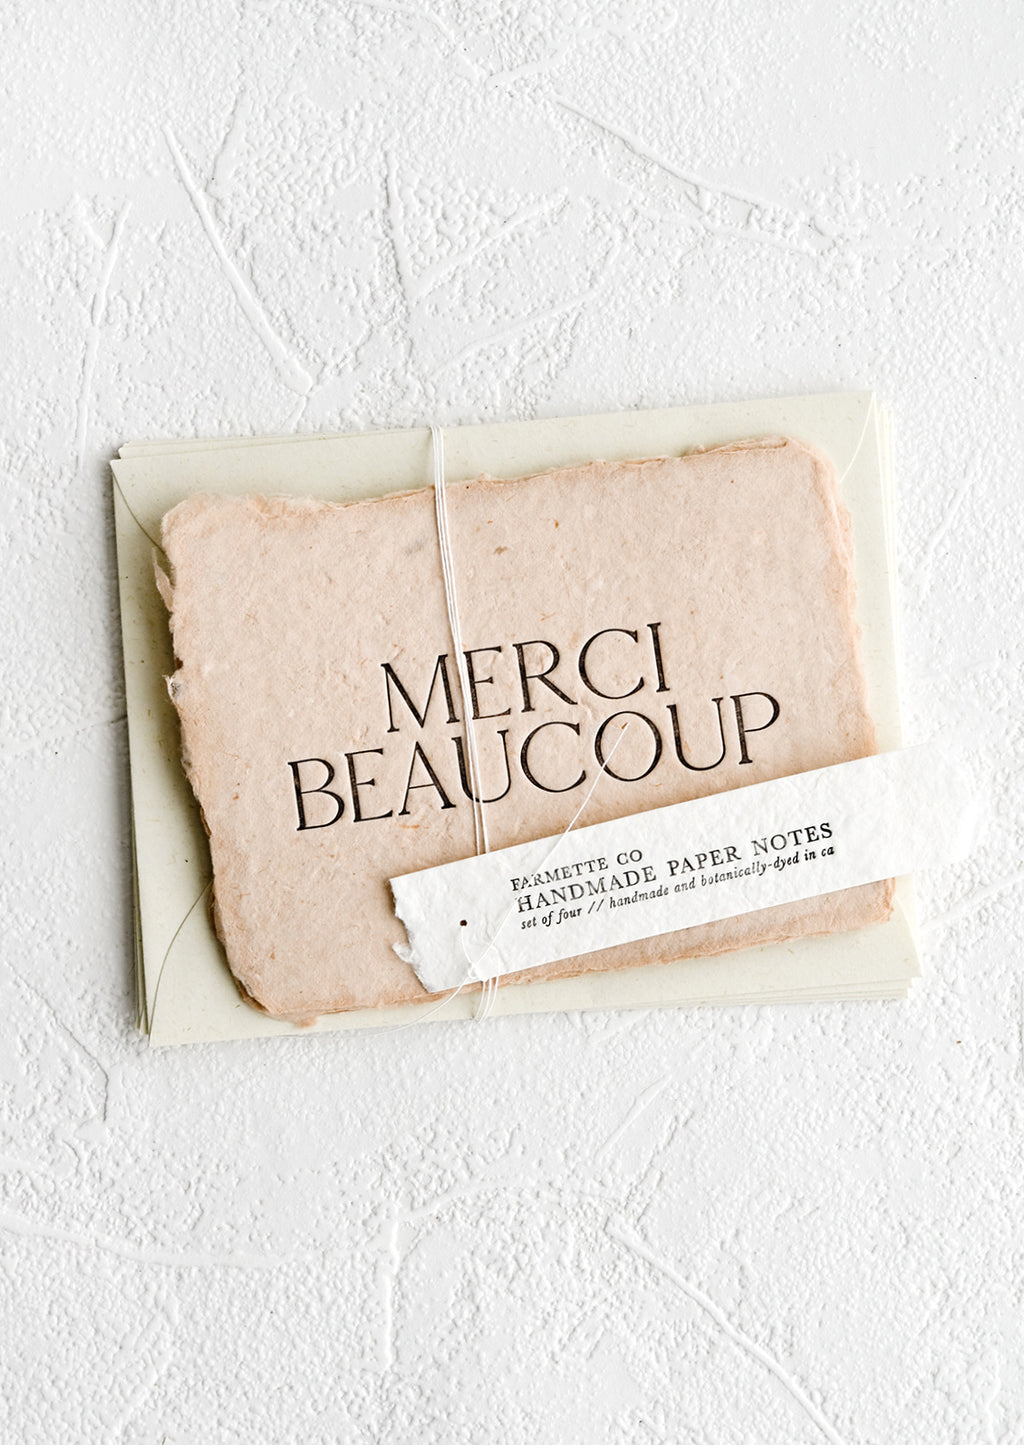 Set of 4: A pack of greeting cards made from blush handmade paper and large letters spelling "Merci Beaucoup".